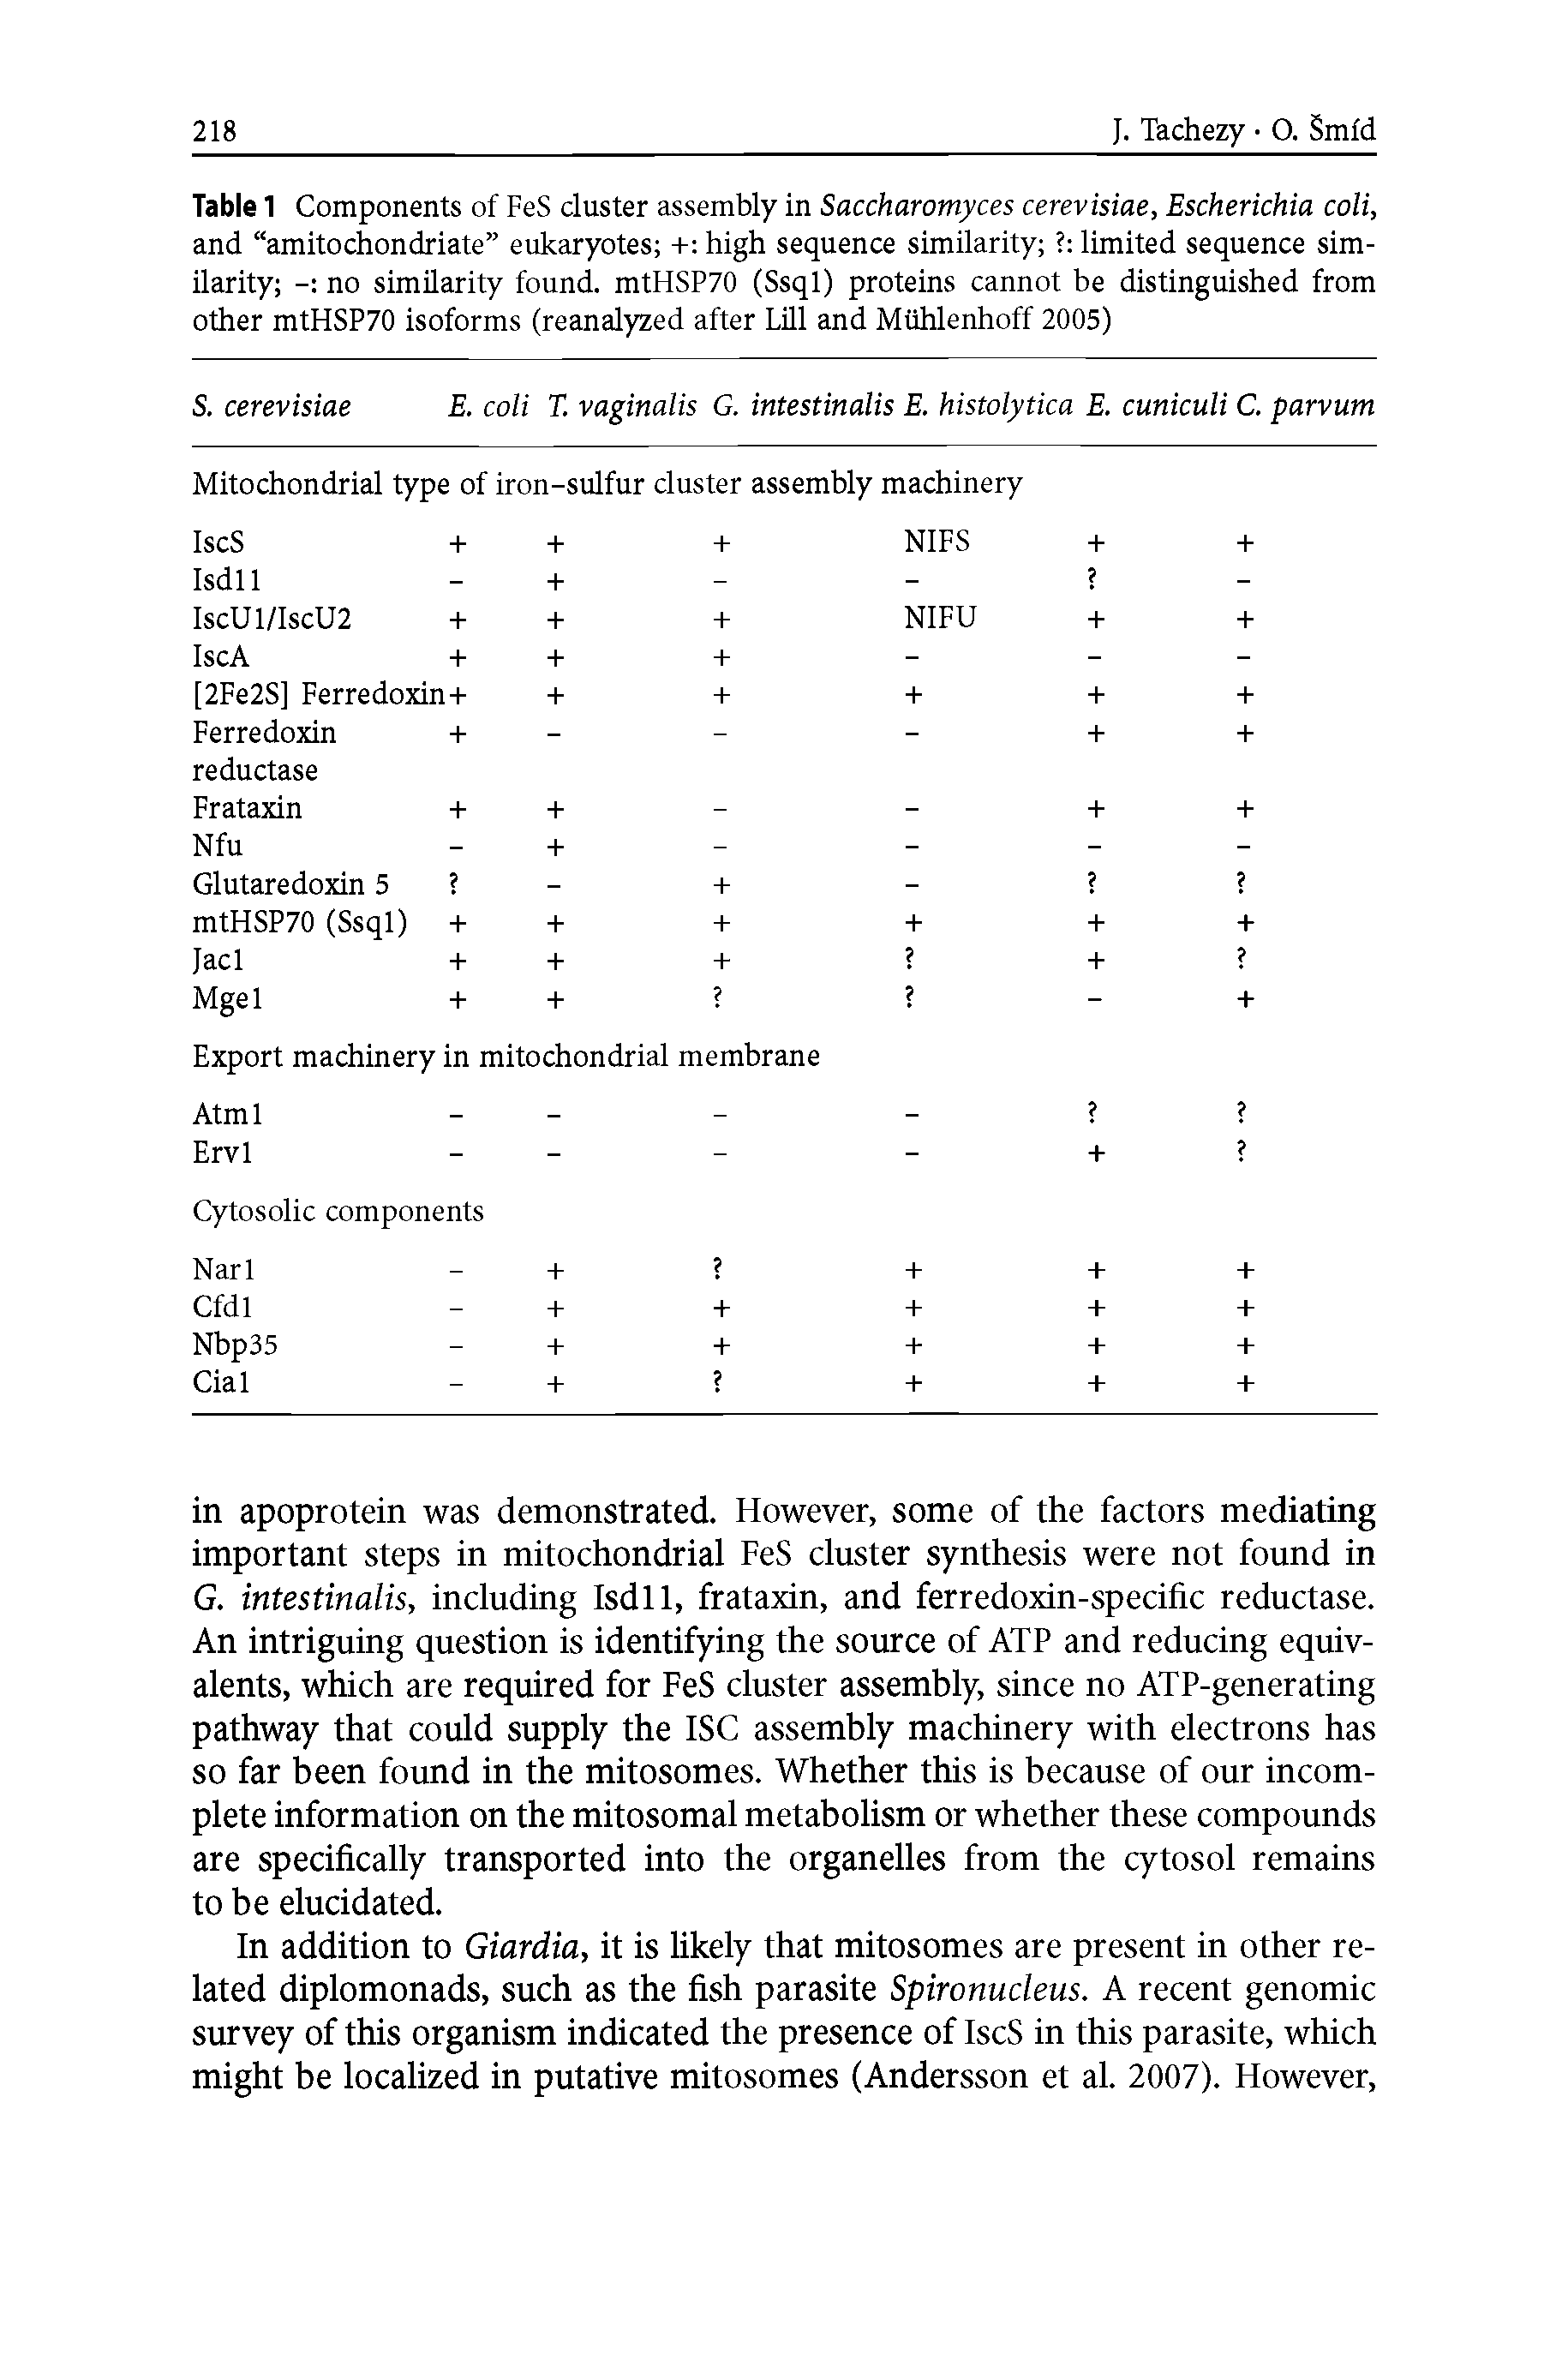 Table 1 Components of FeS cluster assembly in Saccharomyces cerevisiae, Escherichia coli, and amitochondriate eukaryotes + high sequence similarity limited sequence similarity no similarity found. mtHSP70 (Ssql) proteins cannot be distinguished from other mtHSP70 isoforms (reanalyzed after Lill and Miihlenhoff 2005) ...